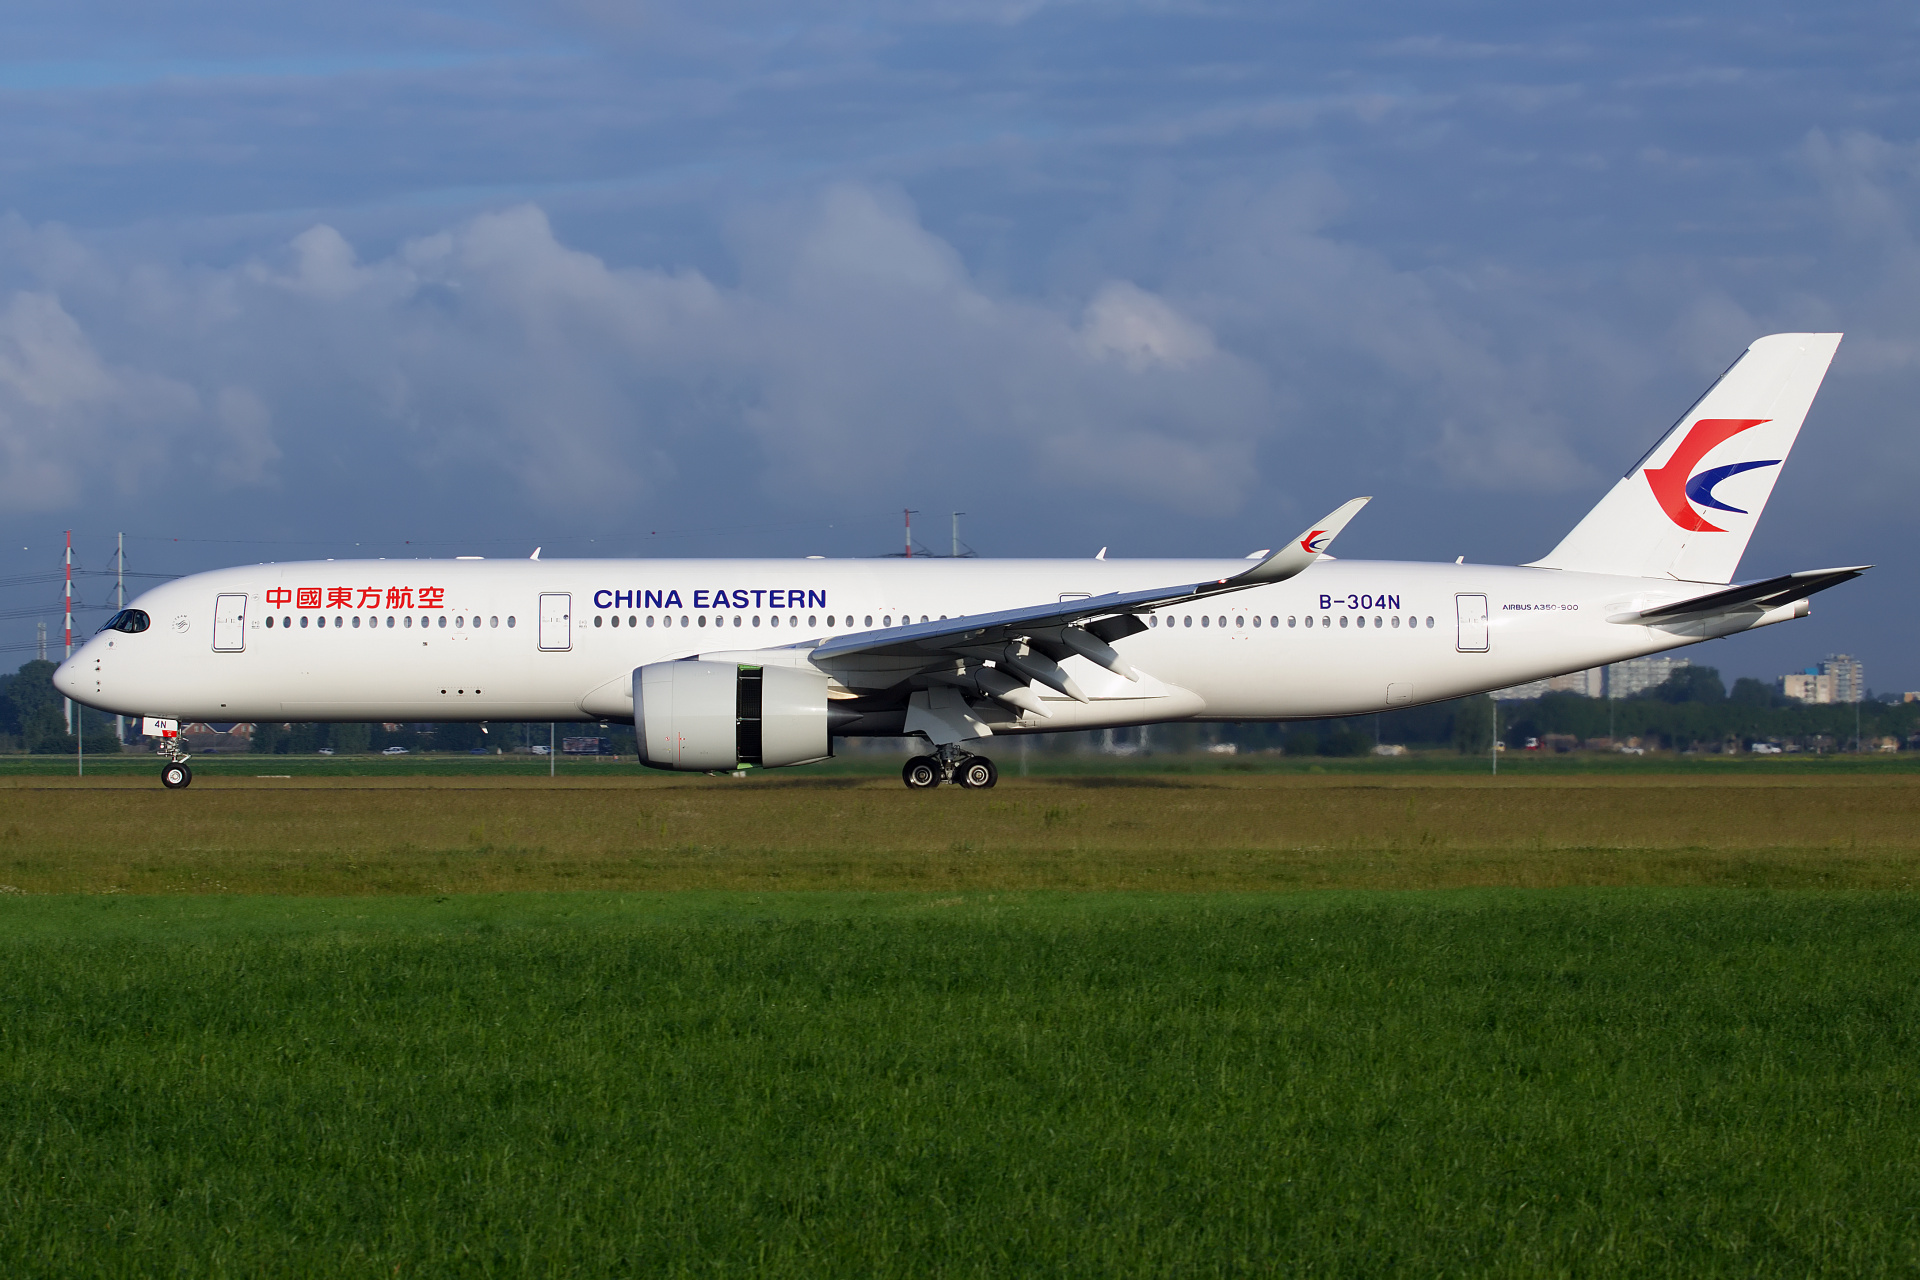 B-304N, China Eastern Airlines (Samoloty » Spotting na Schiphol » Airbus A350-900)